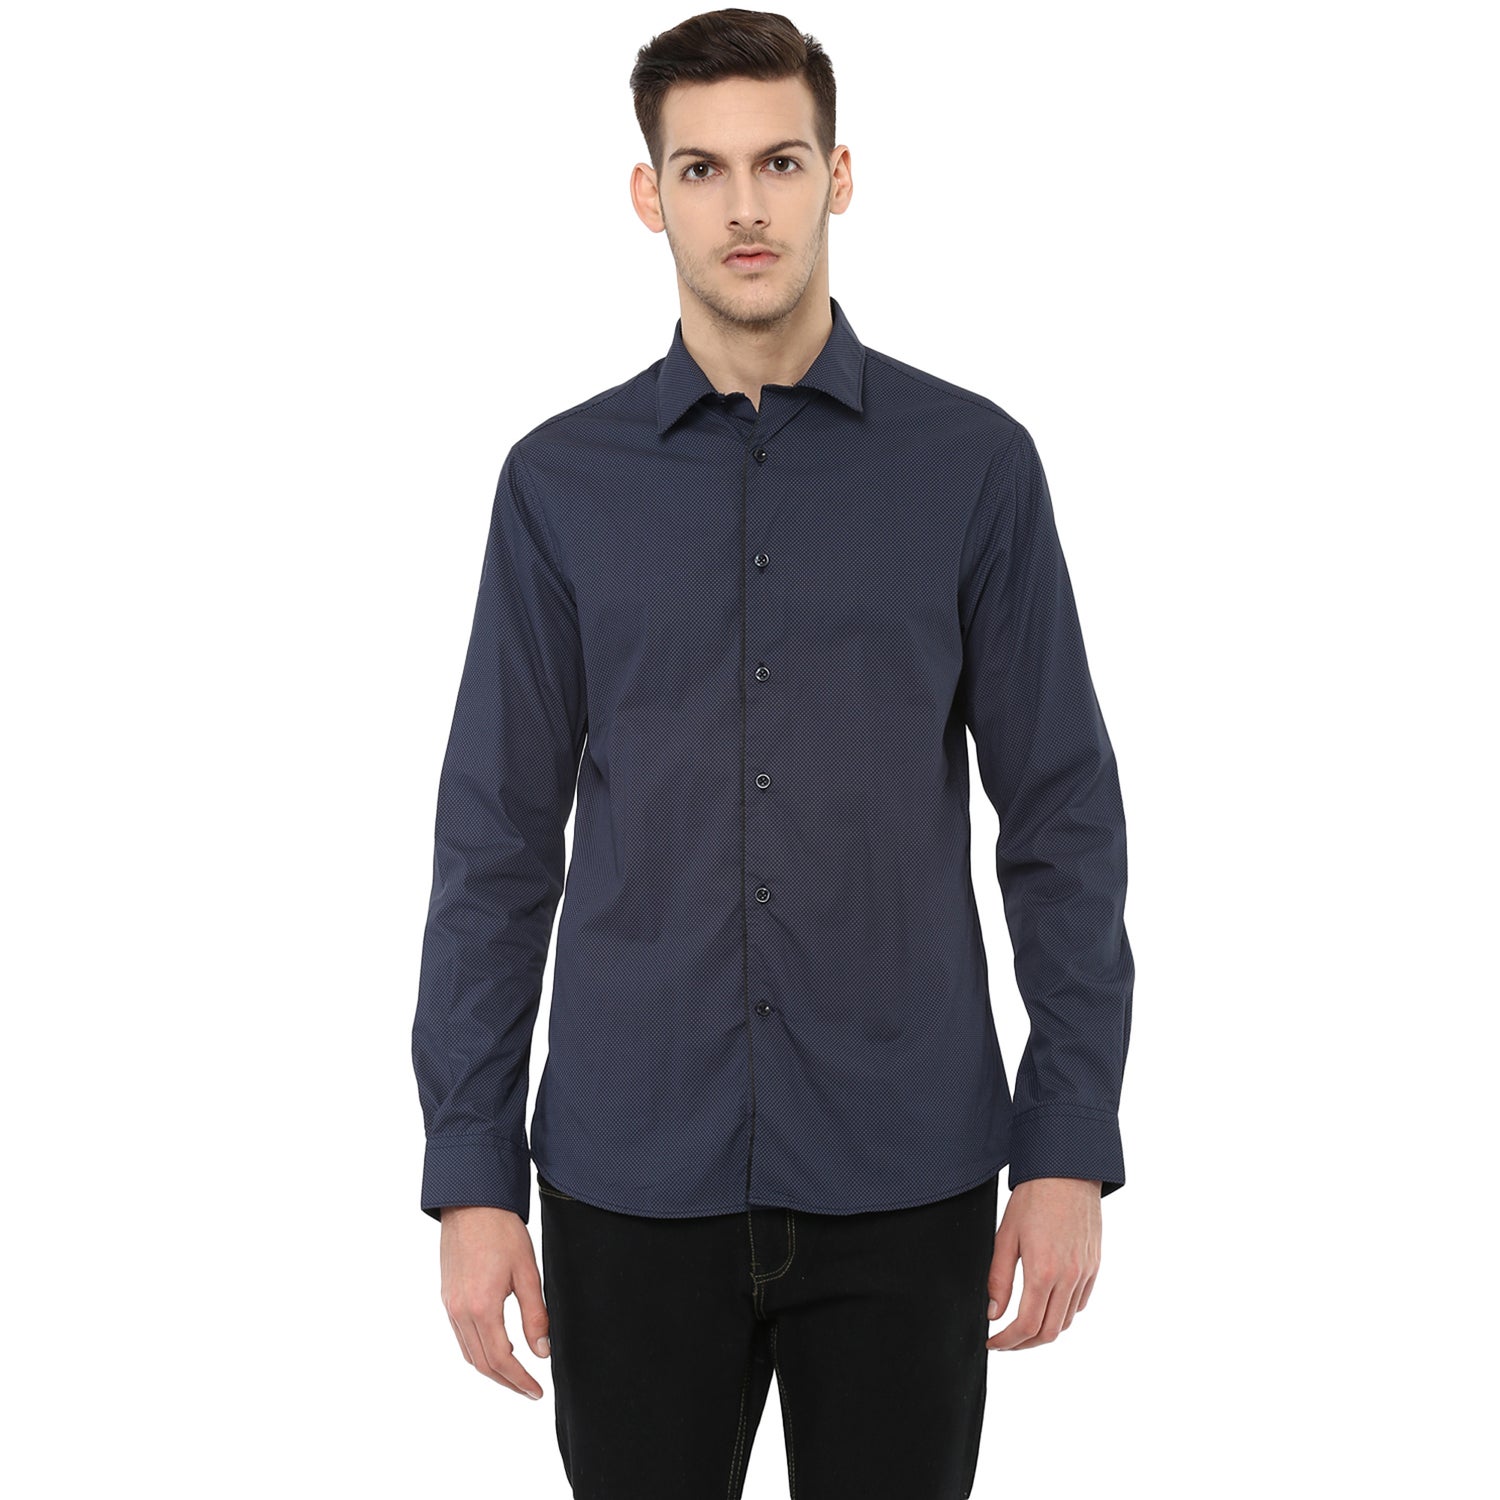 Navy Blue Slim Fit Printed Smart Casual Shirt (MABULLE)